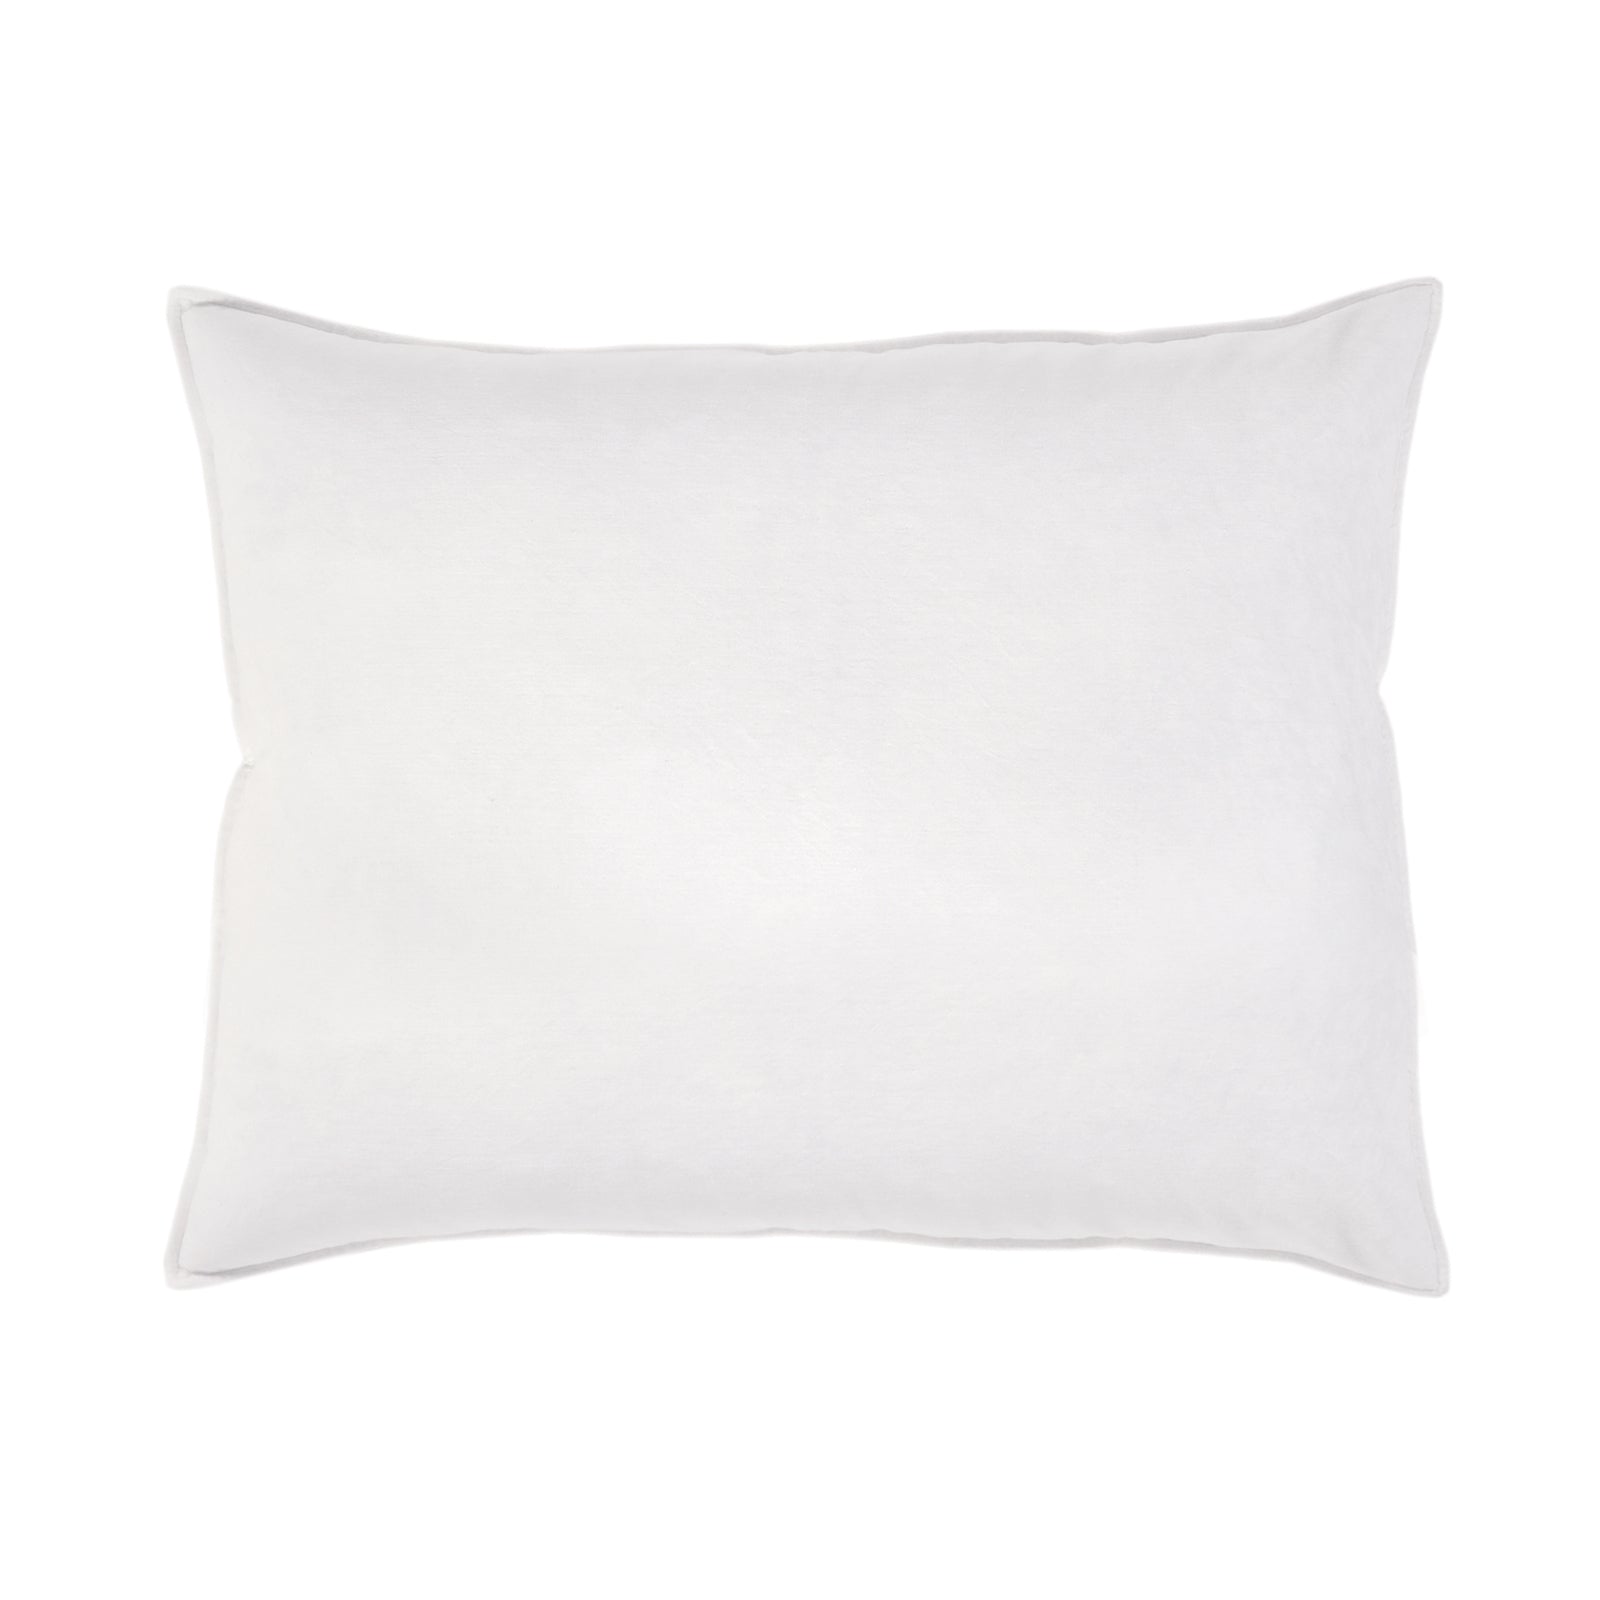 Bianca BIG PILLOW 28&quot; X 36&quot; WITH INSERT - White color - Pom pom At Home